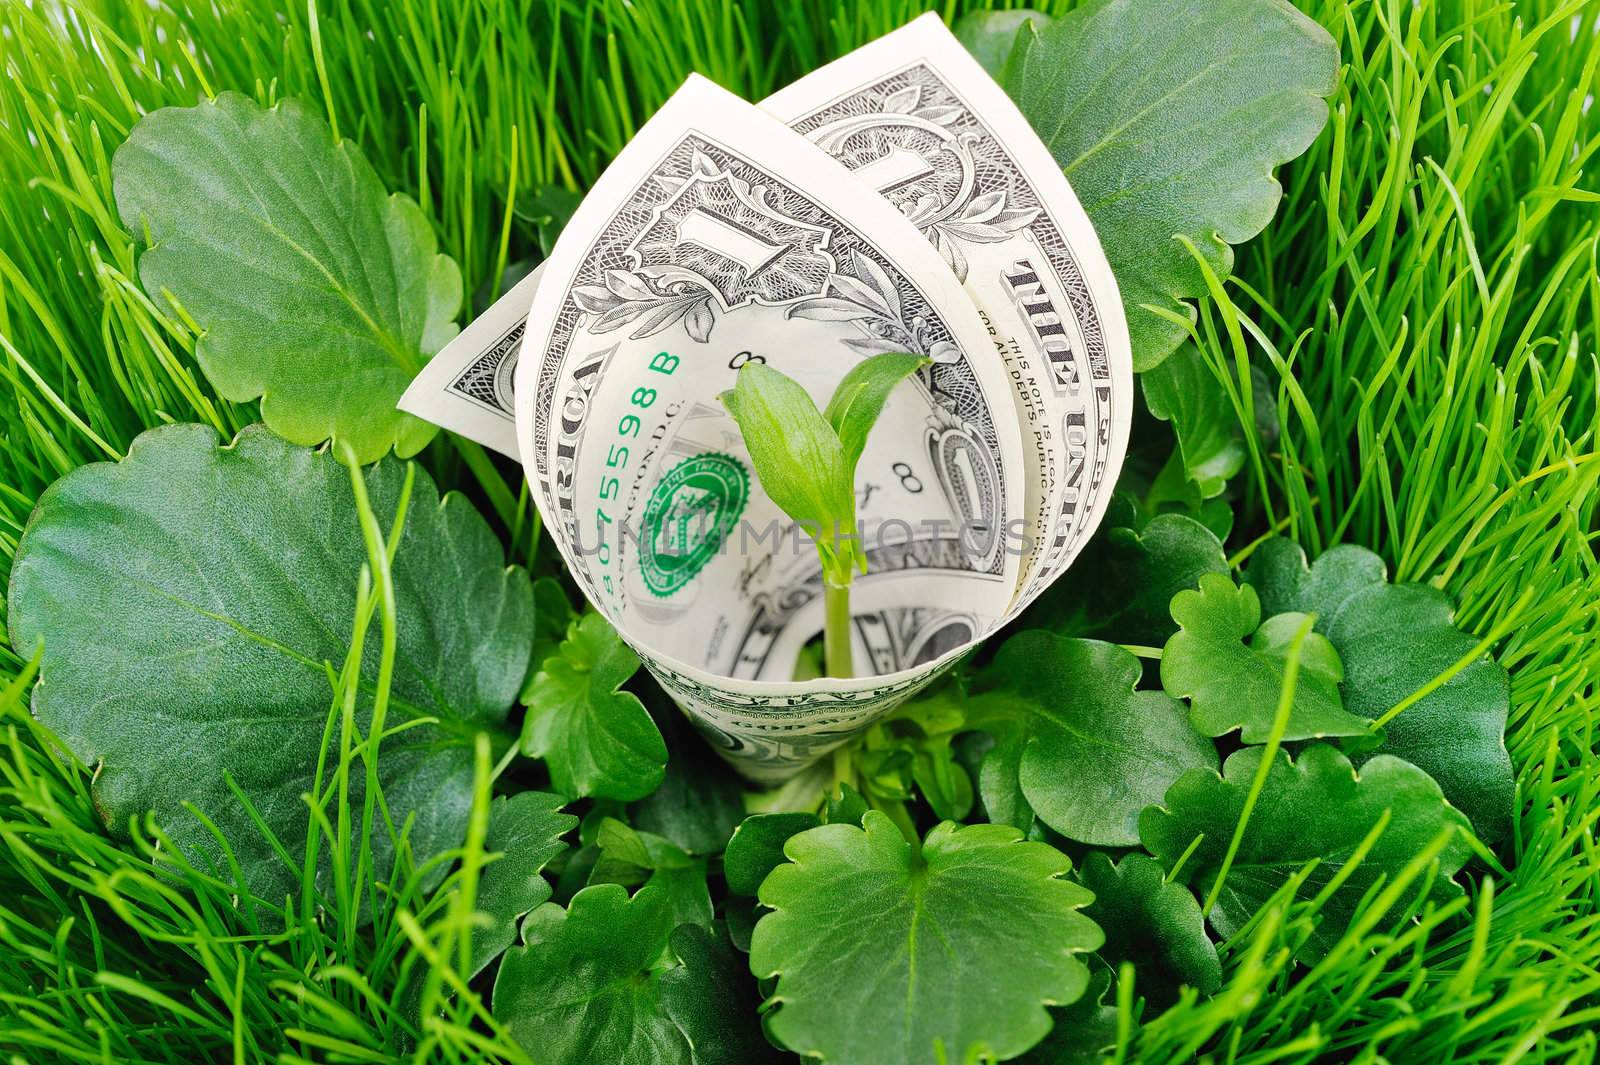 The banknote between the leaves of green grass